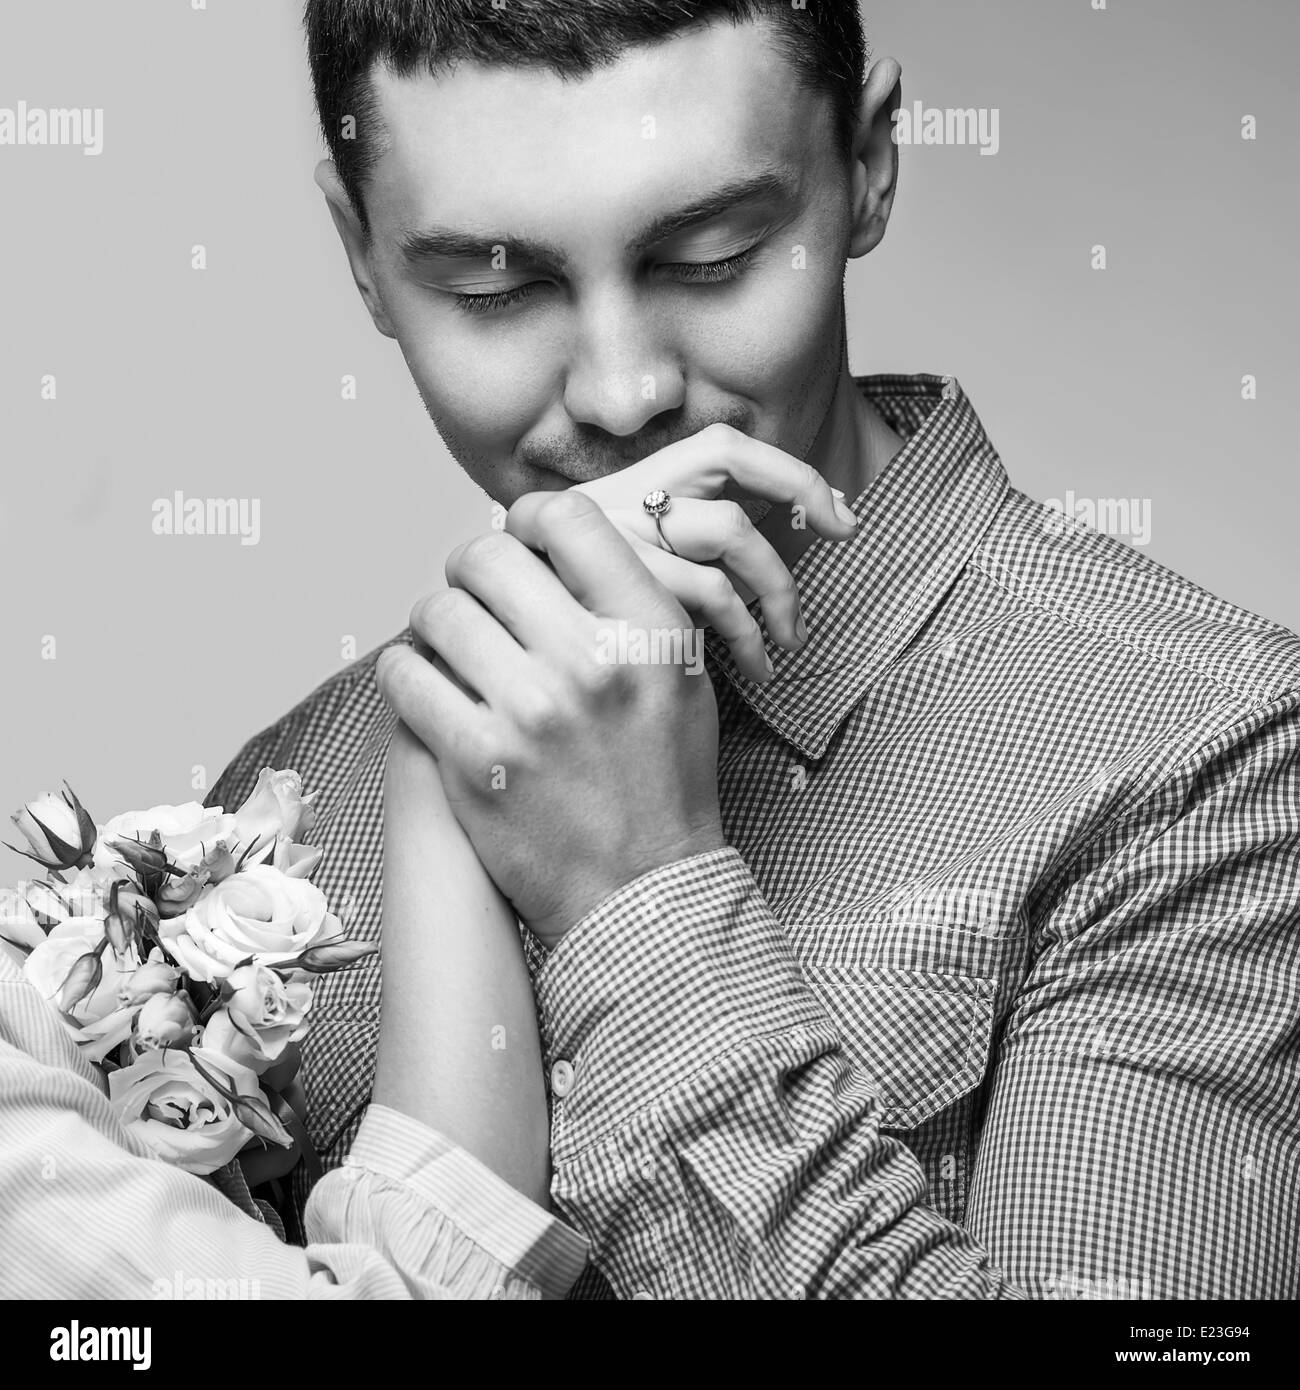 man kissing a woman's hand Stock Photo